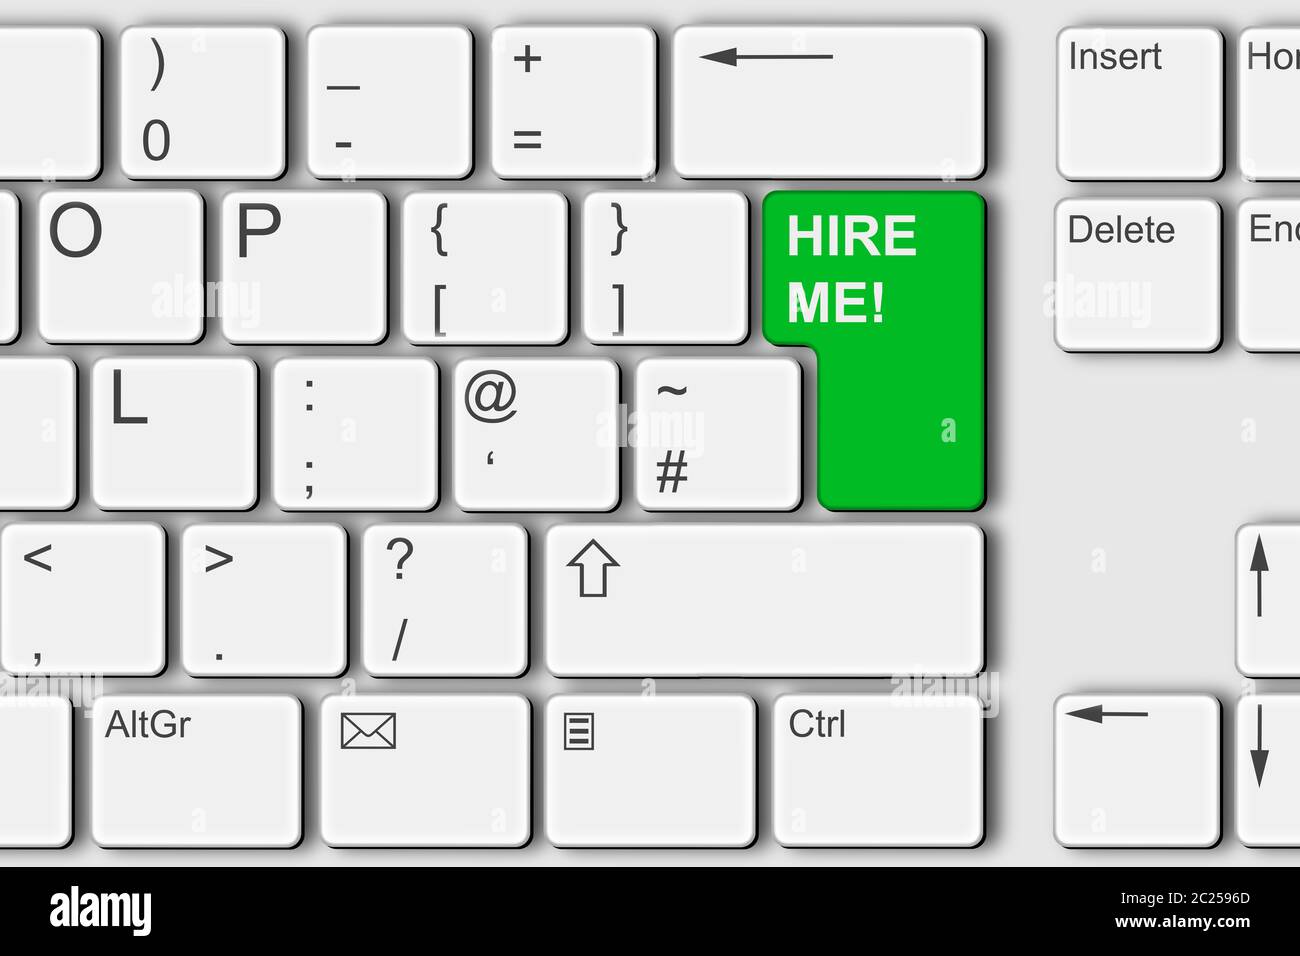 Hire me concept PC computer keyboard illustration Stock Photo